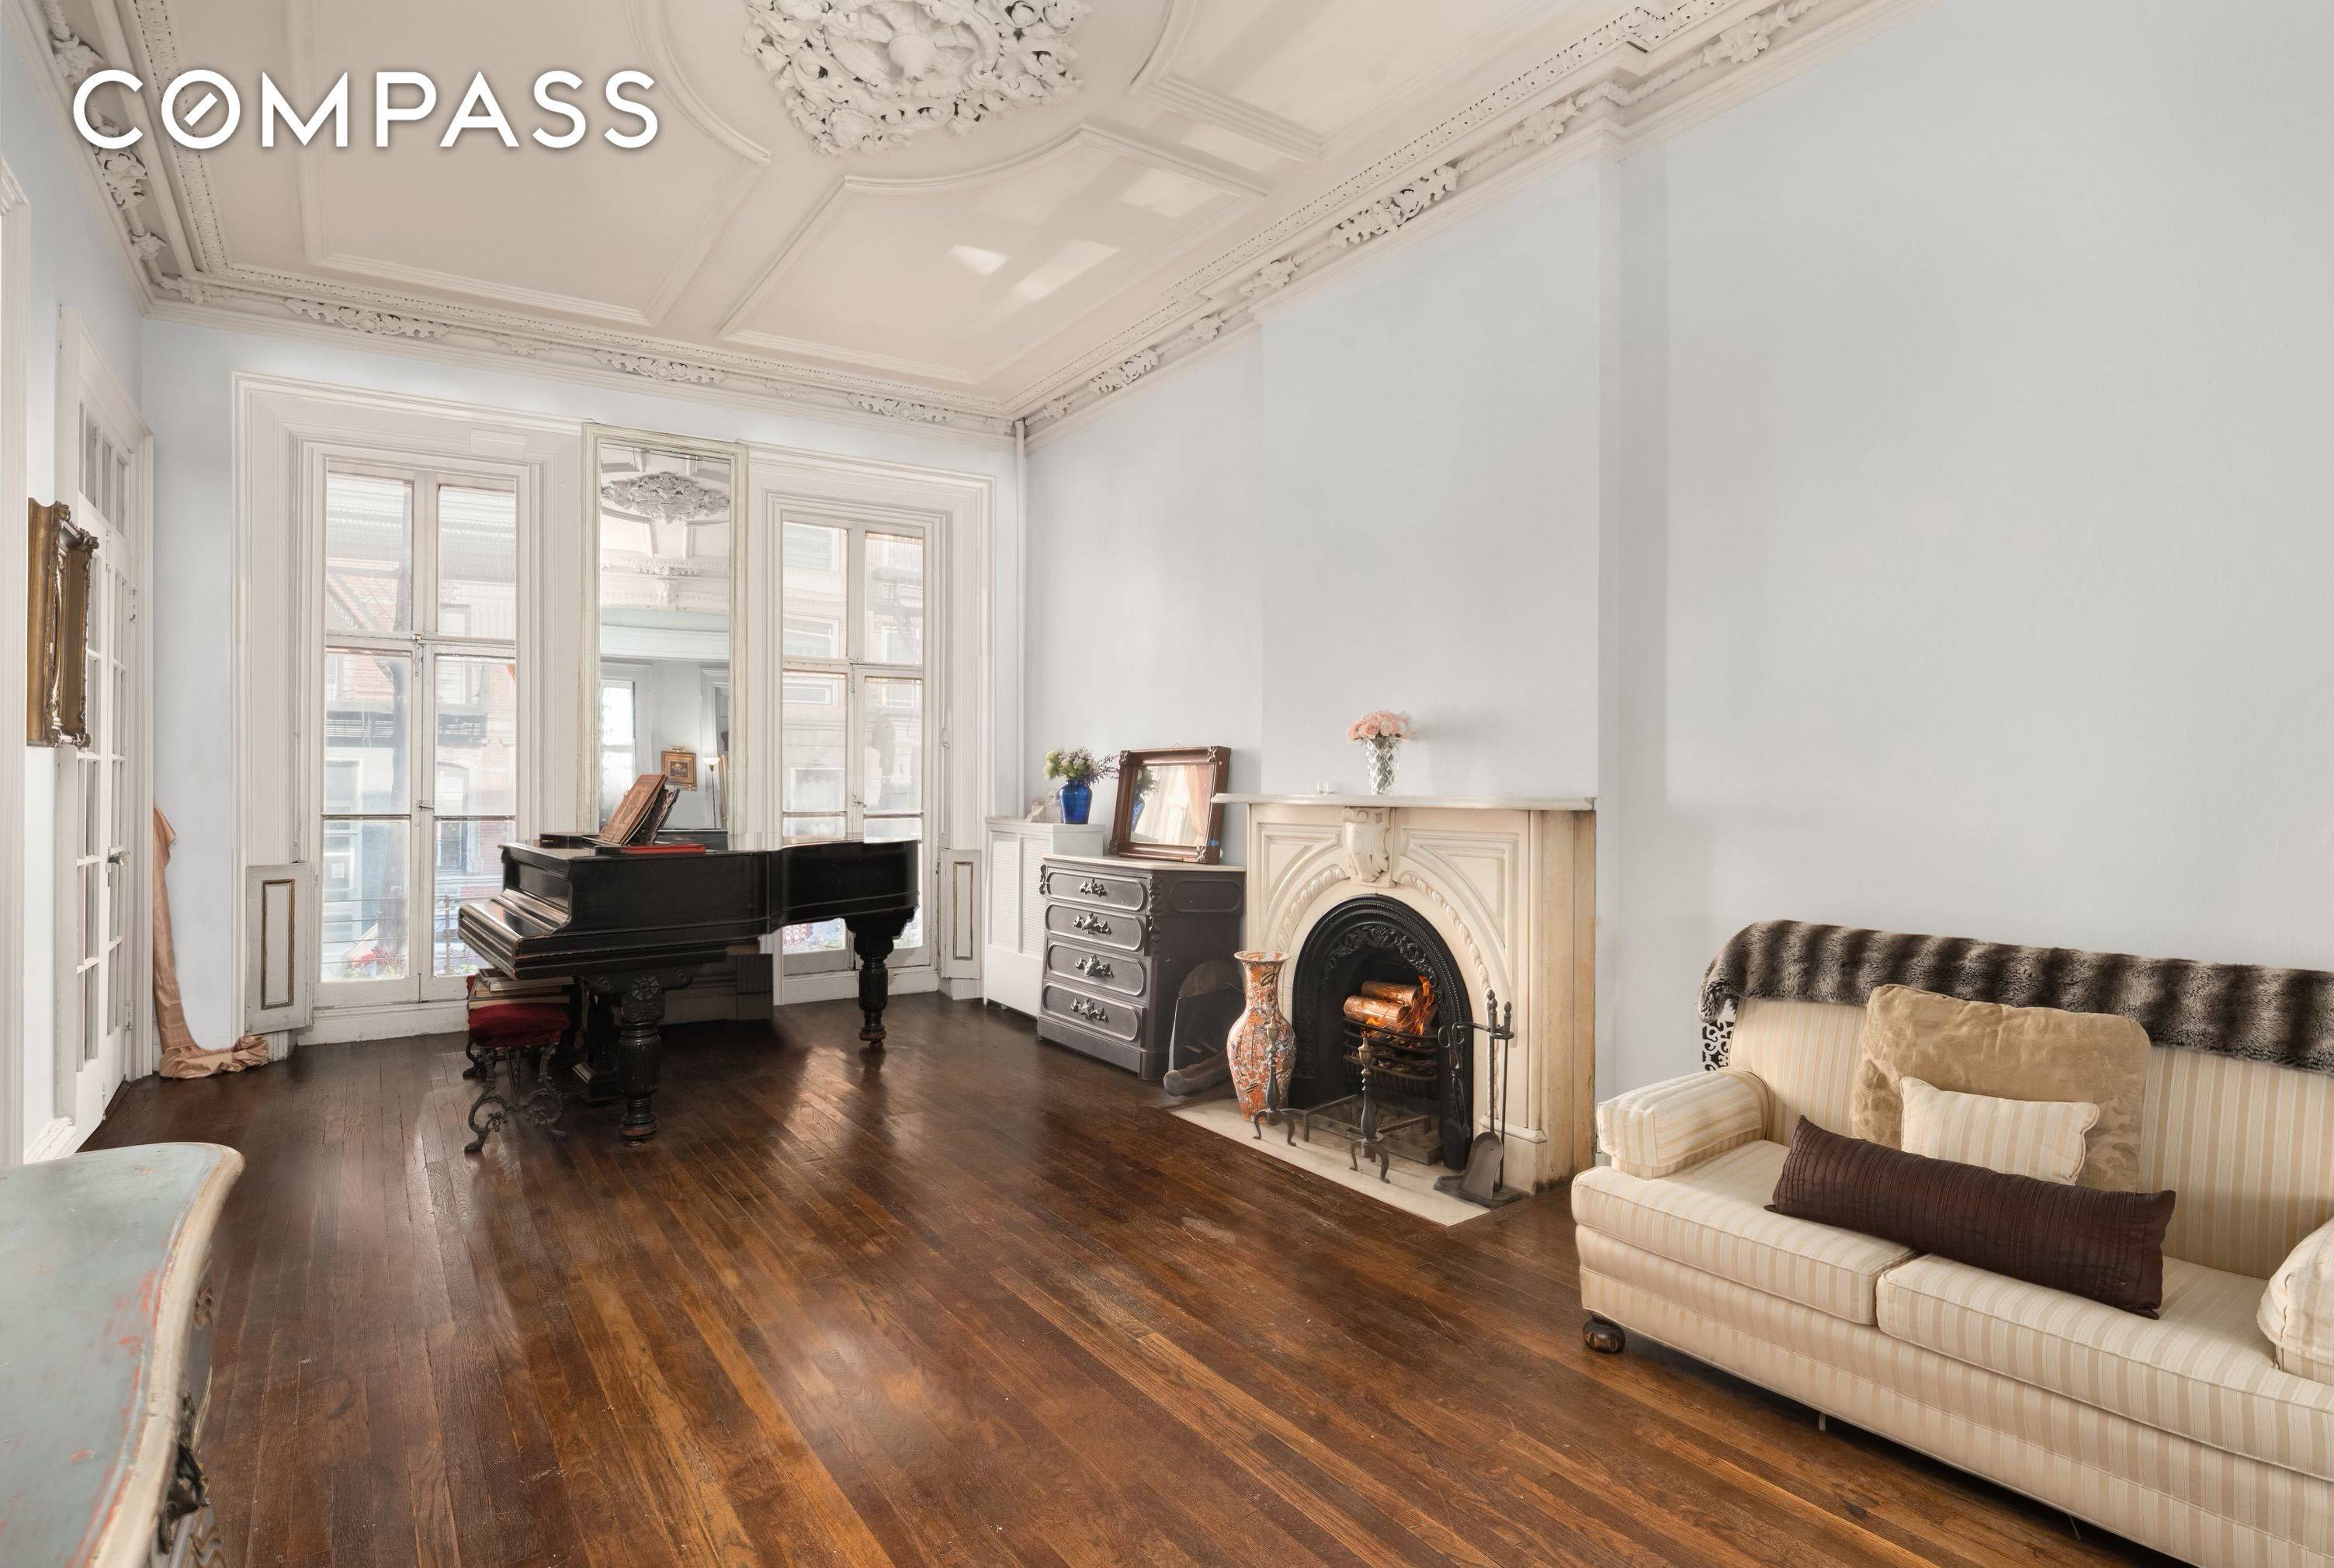 Situated within a row of circa 1850 s Italianate townhouses on one of the West Village s prized cobblestone blocks, 258 West 12th Street is a stately 21 foot wide ...